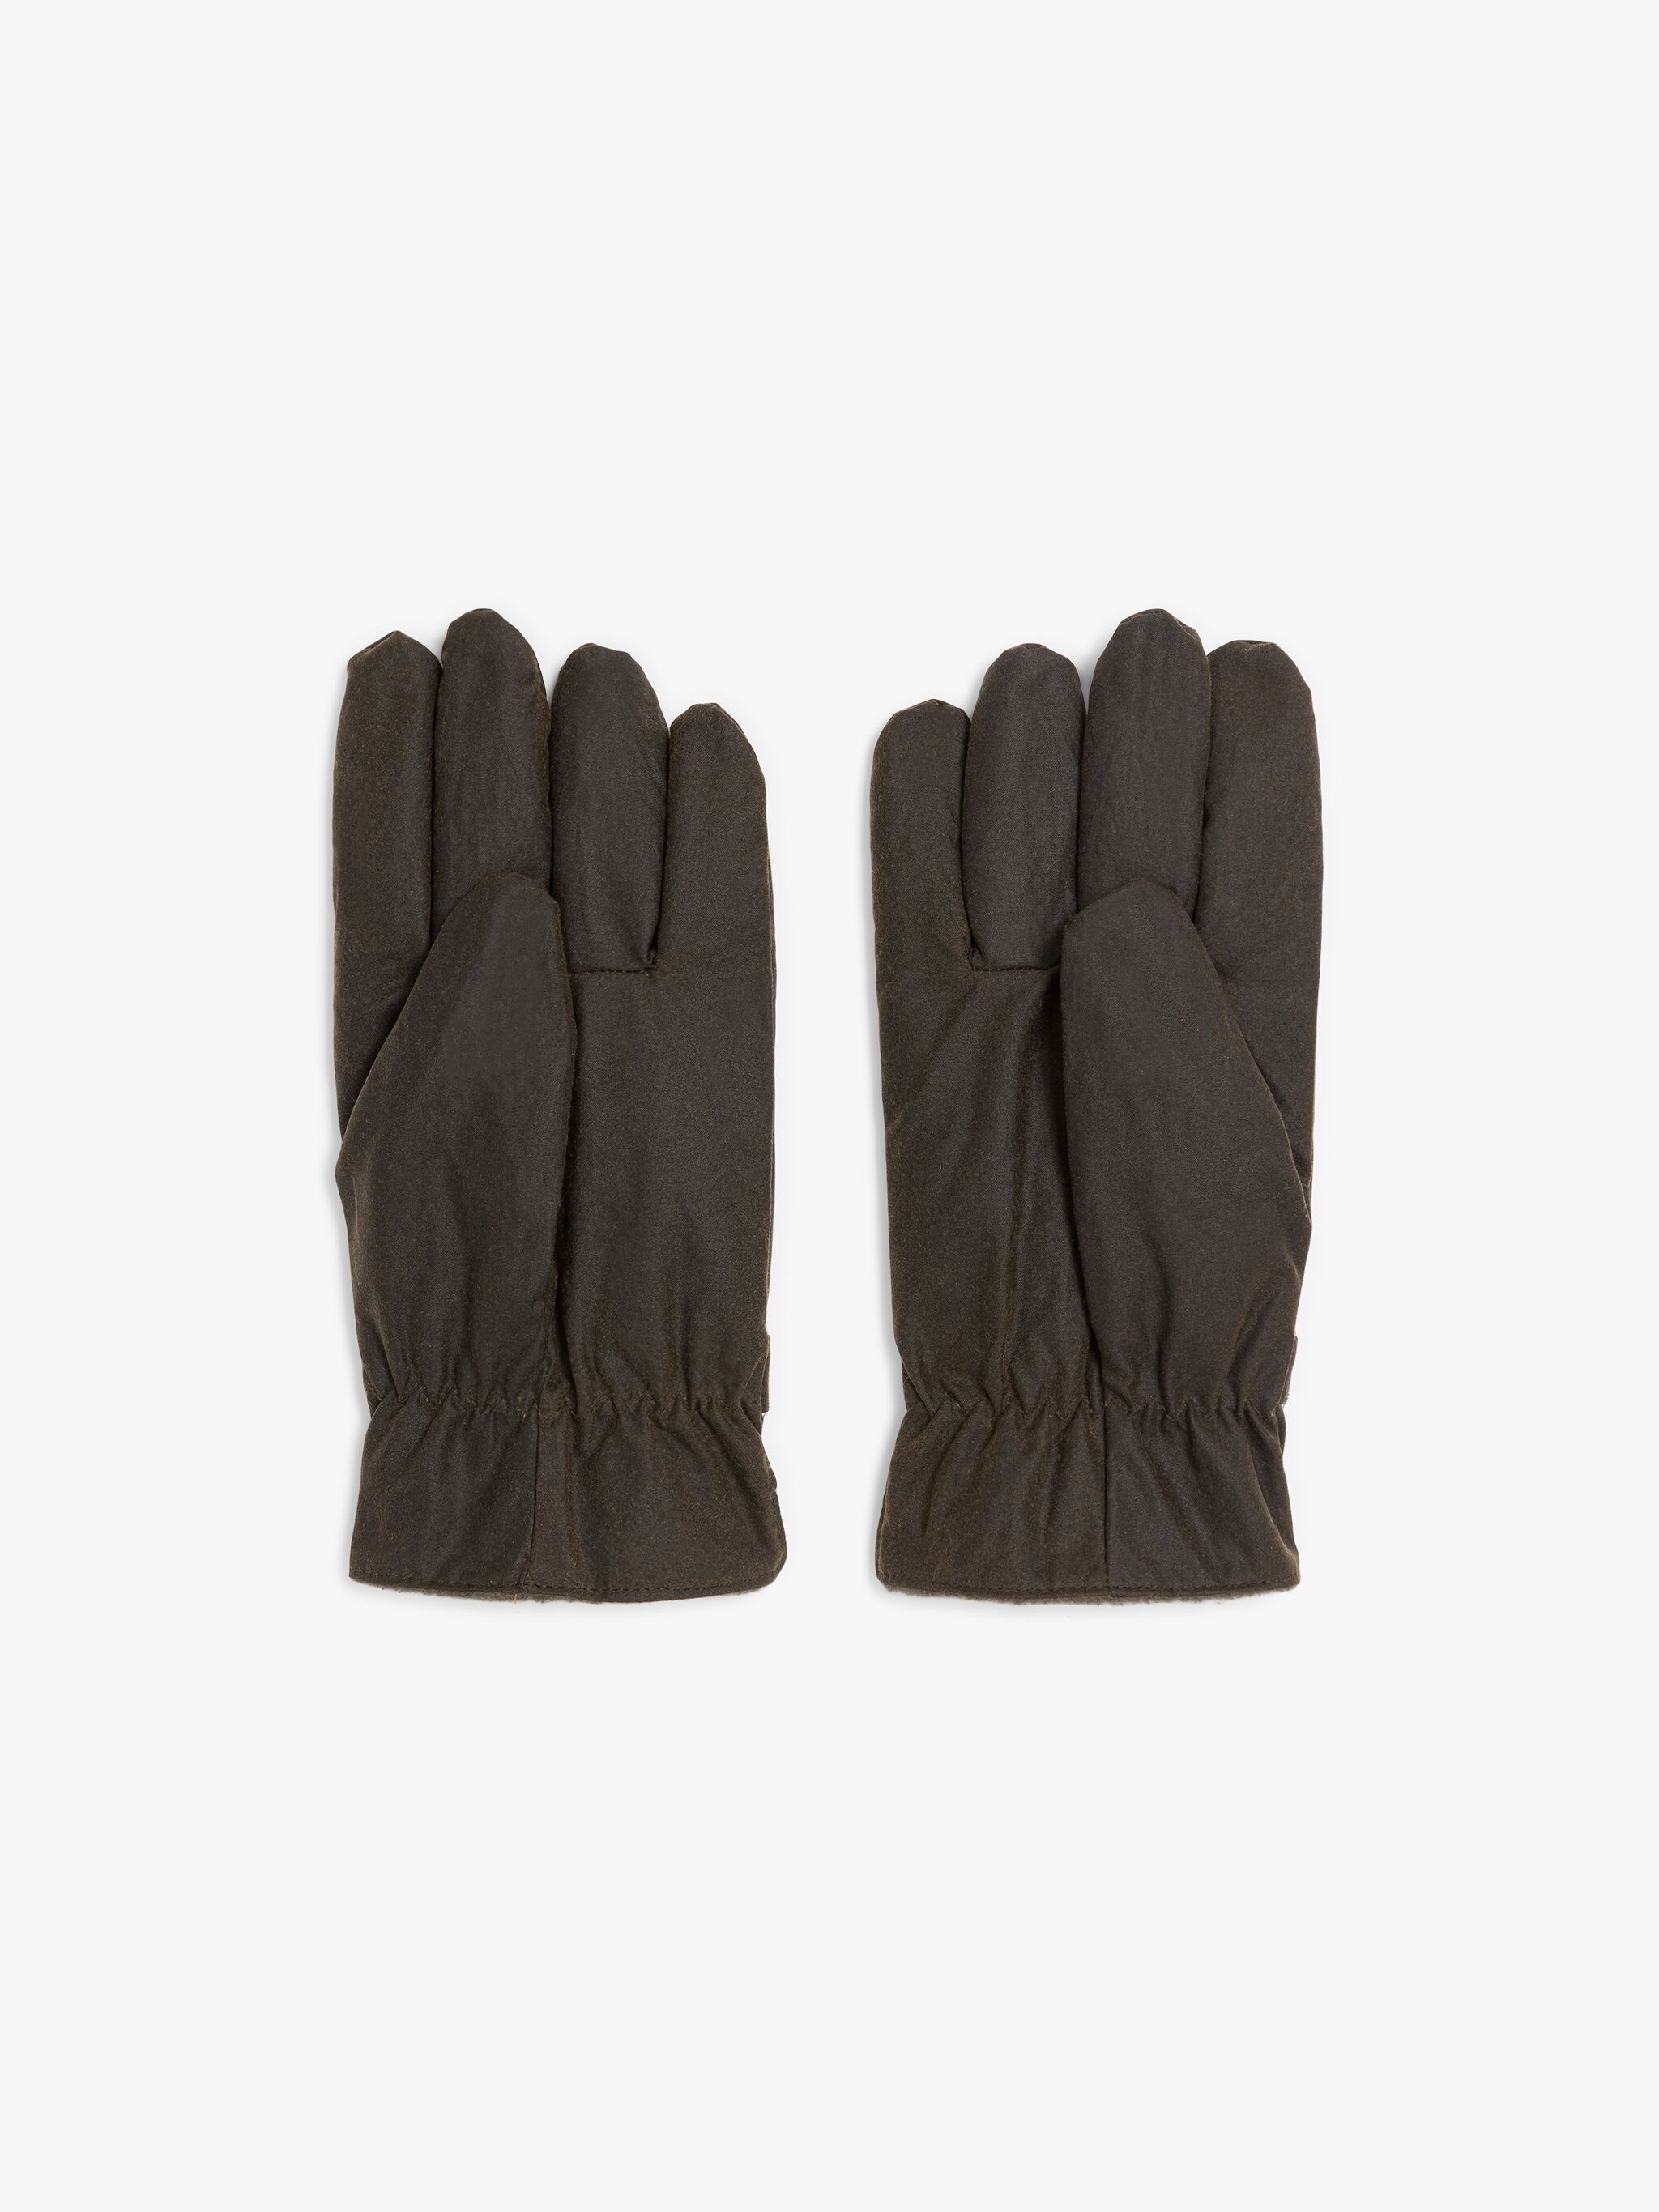 OLIVE WAXED COTTON GLOVES - 3